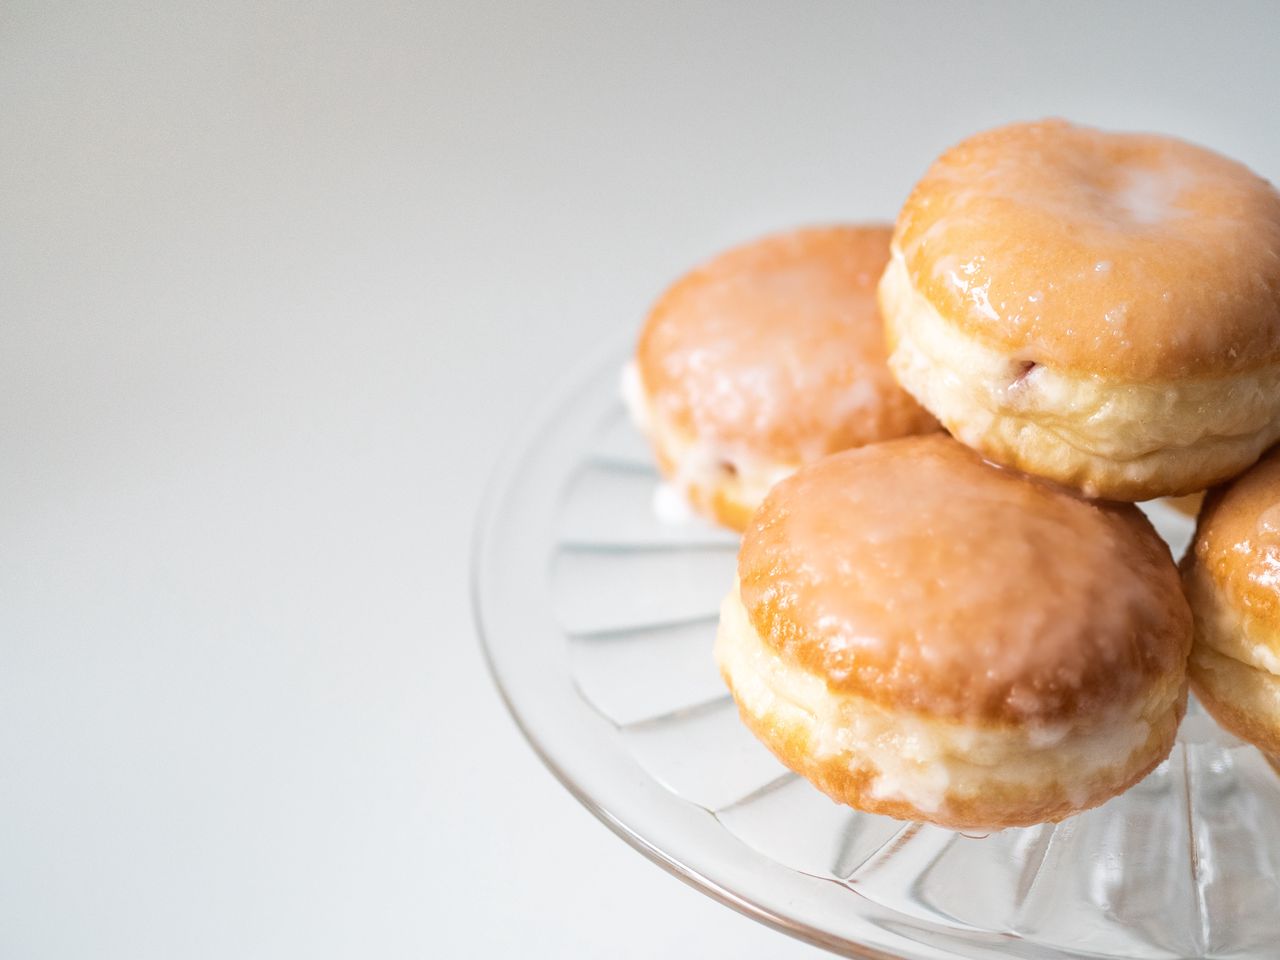 Revolutionize your Carnival treats: Donuts with trendy salted caramel filling